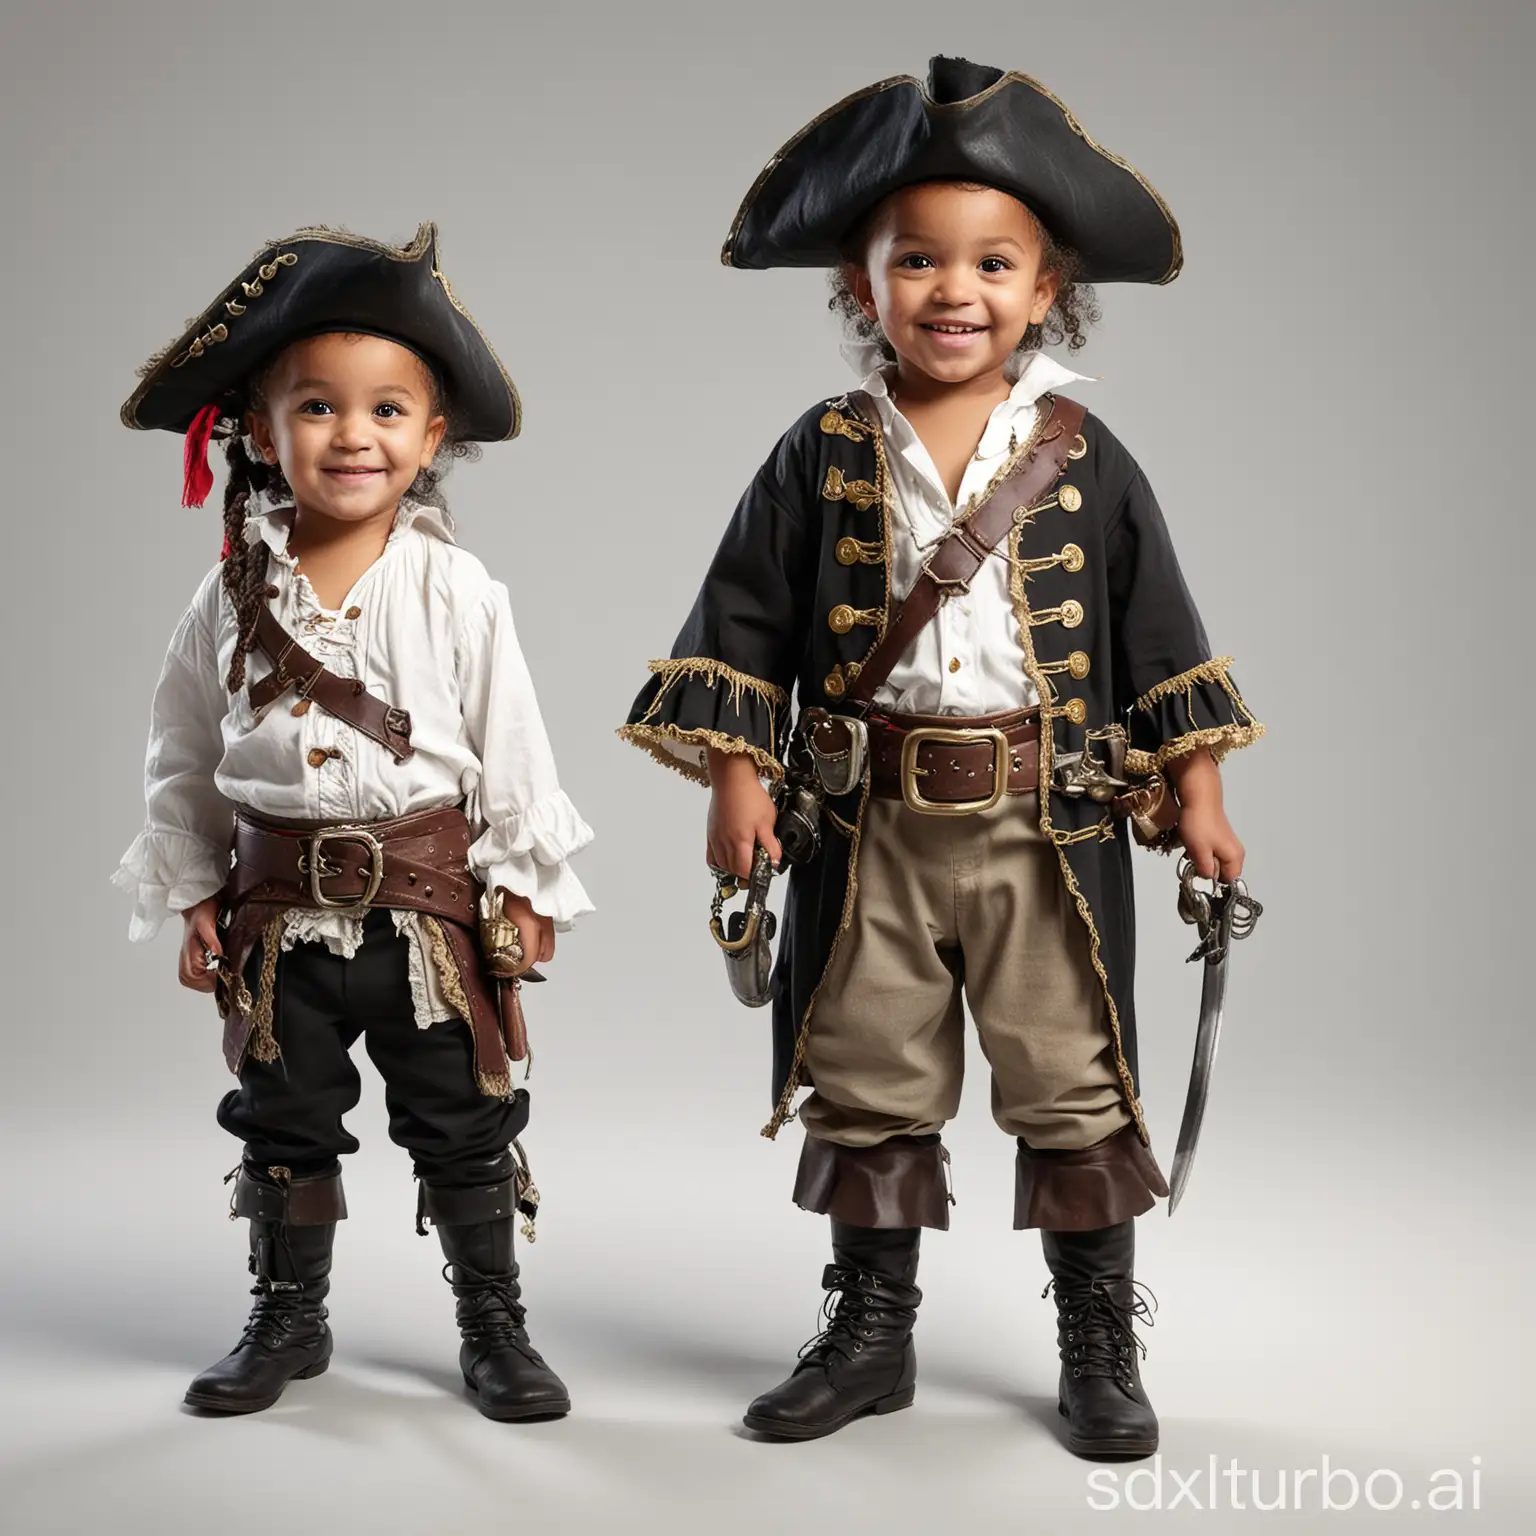 2 kids, one is black and the other is white, dressed as pirates, they are happy and having a good time, cute, on a plain white background. This is a full body photo realistic high resolution image with sharp clean subject focus